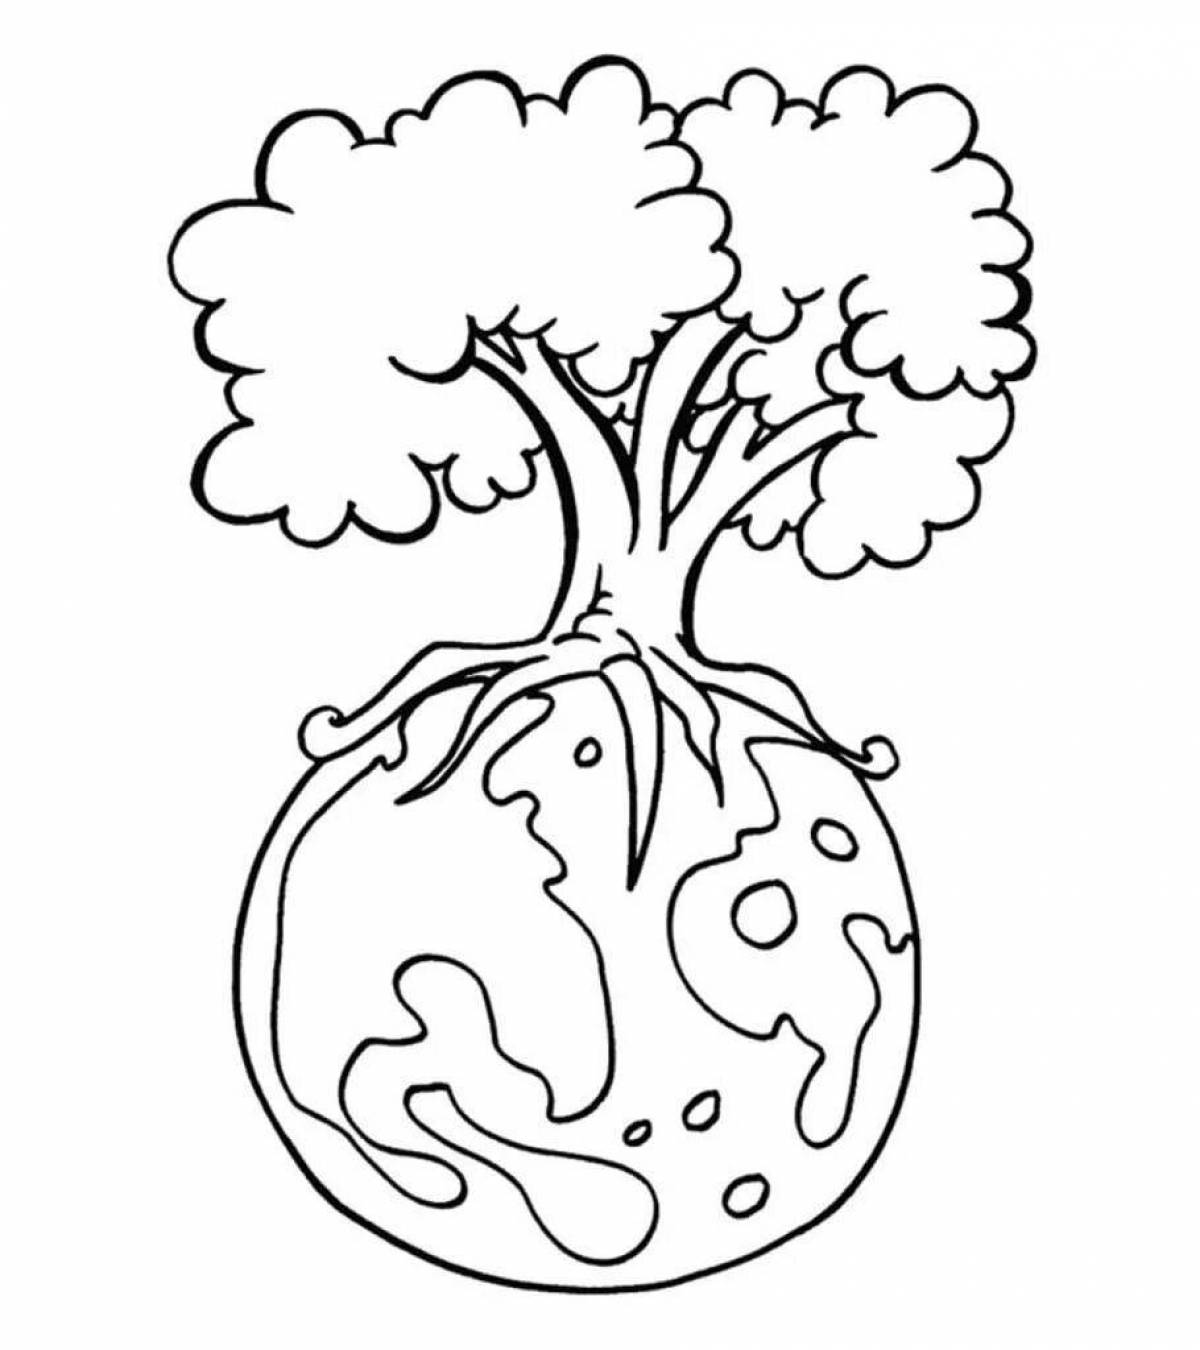 Coloring page cute plant care